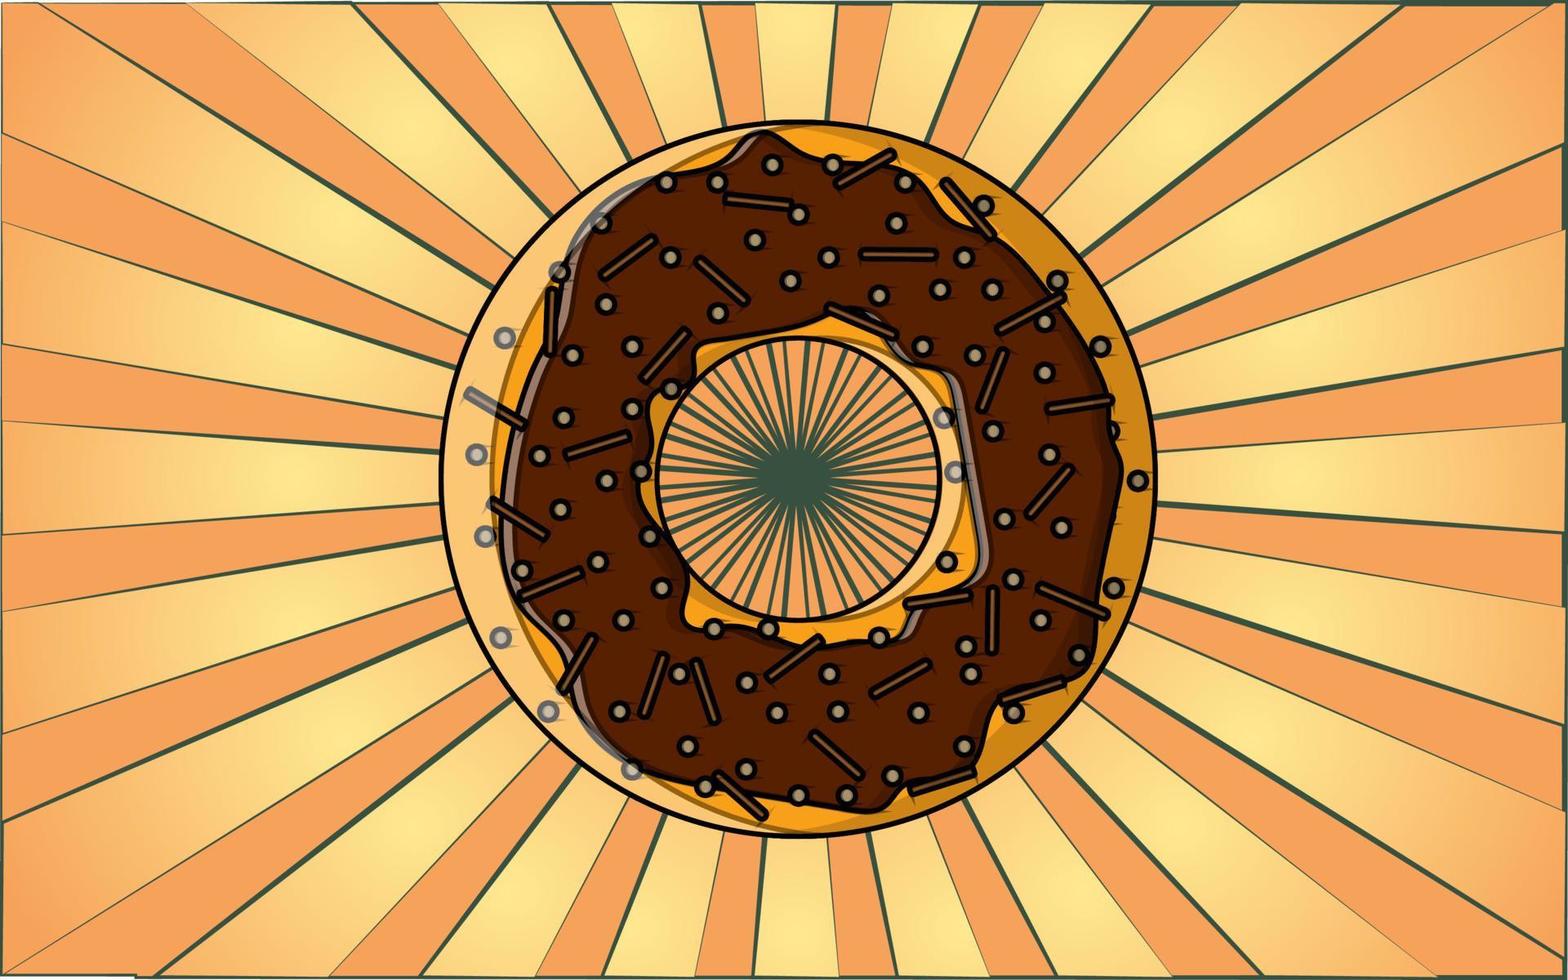 Delicious floury round hearty fresh donut in chocolate on a background of abstract yellow rays. Vector illustration